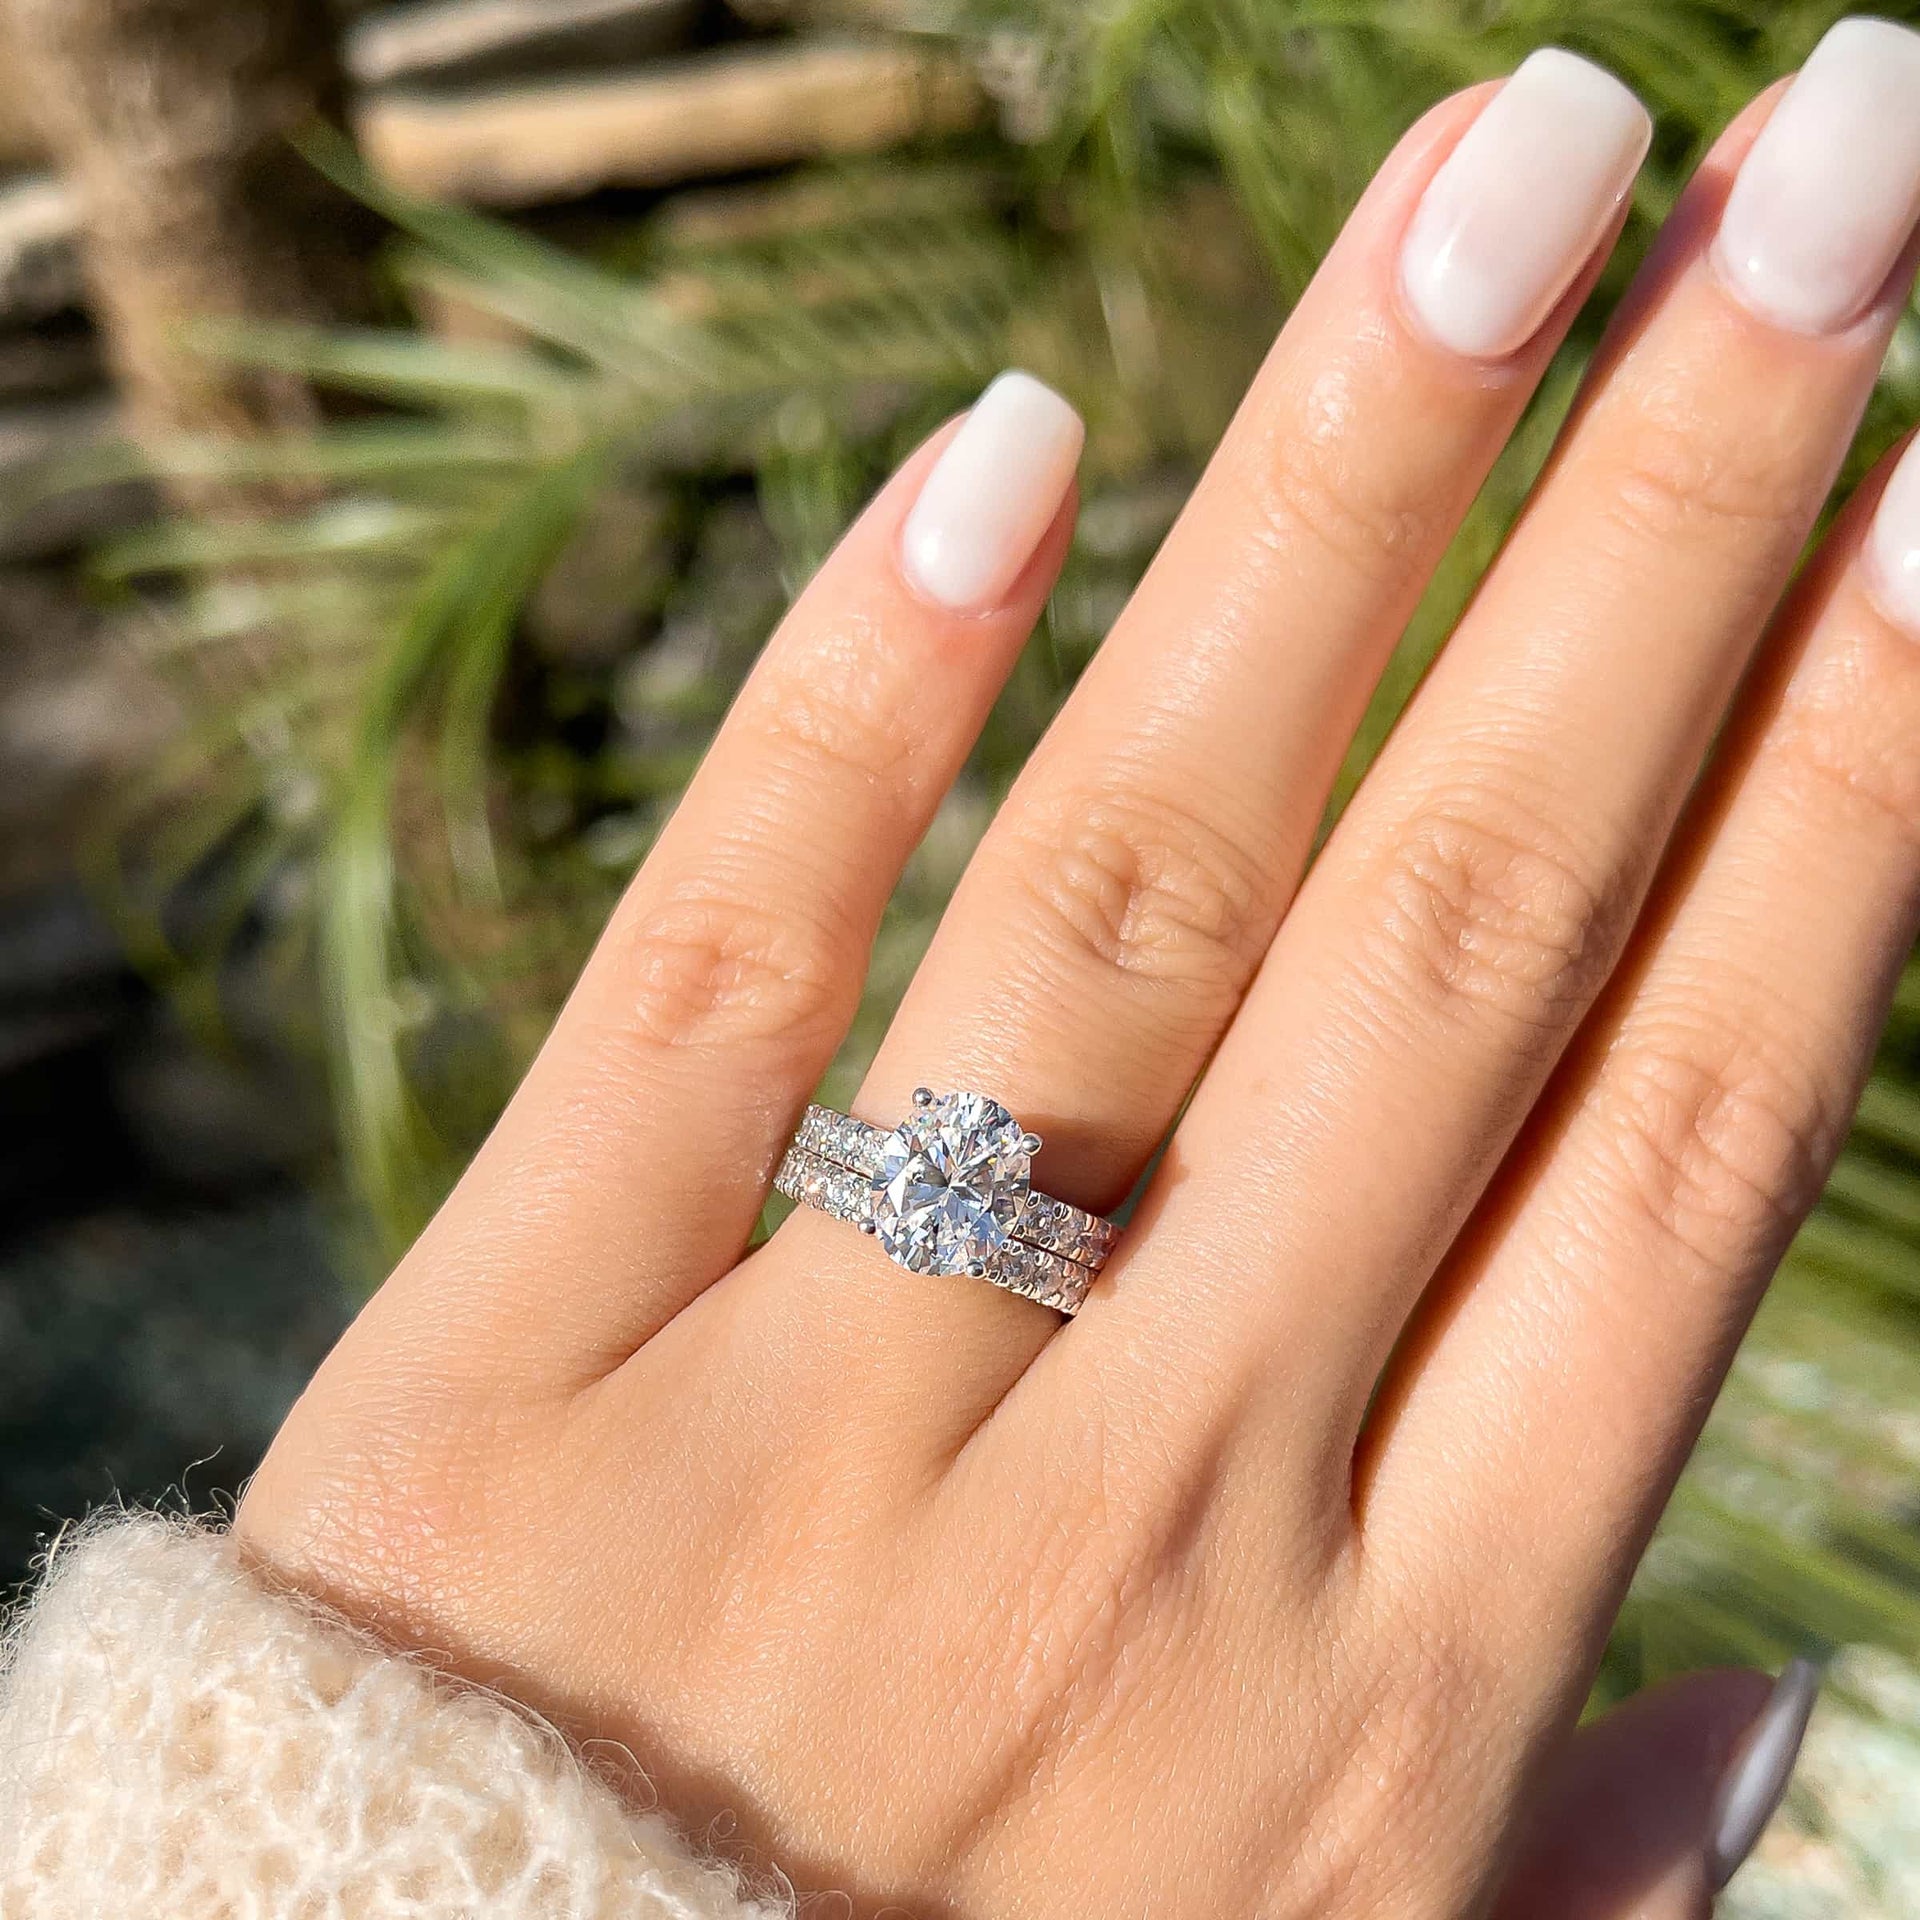 modern silver oval cut engagement ring paired with an eternity band on female hand in front of plants